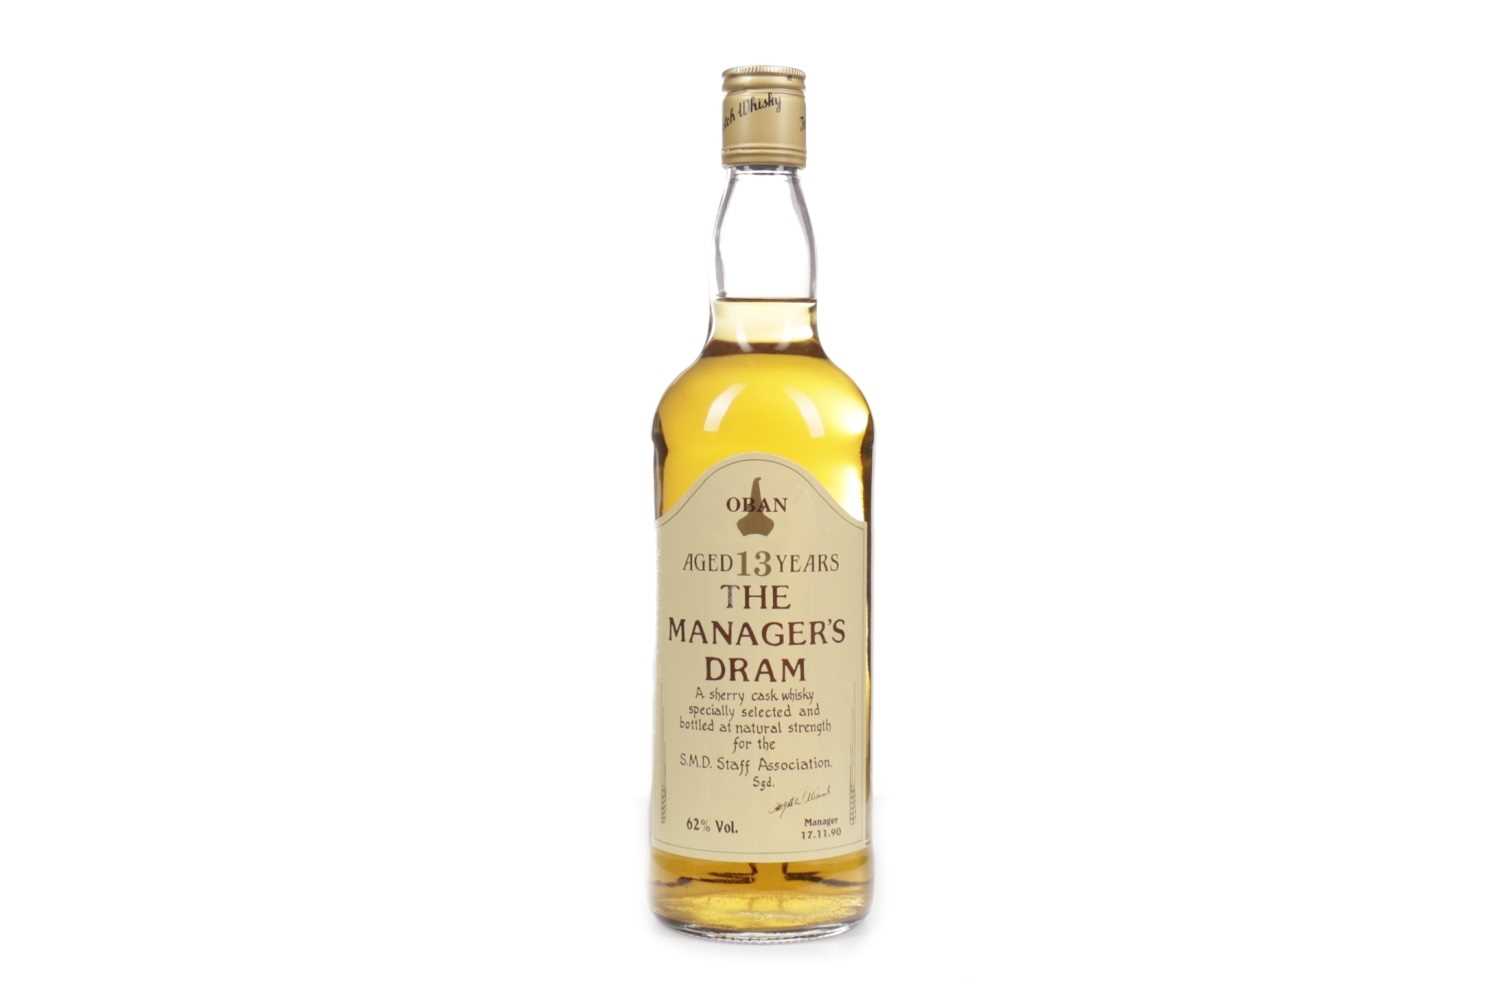 Lot 82 - OBAN THE MANAGERS DRAM AGED 13 YEARS